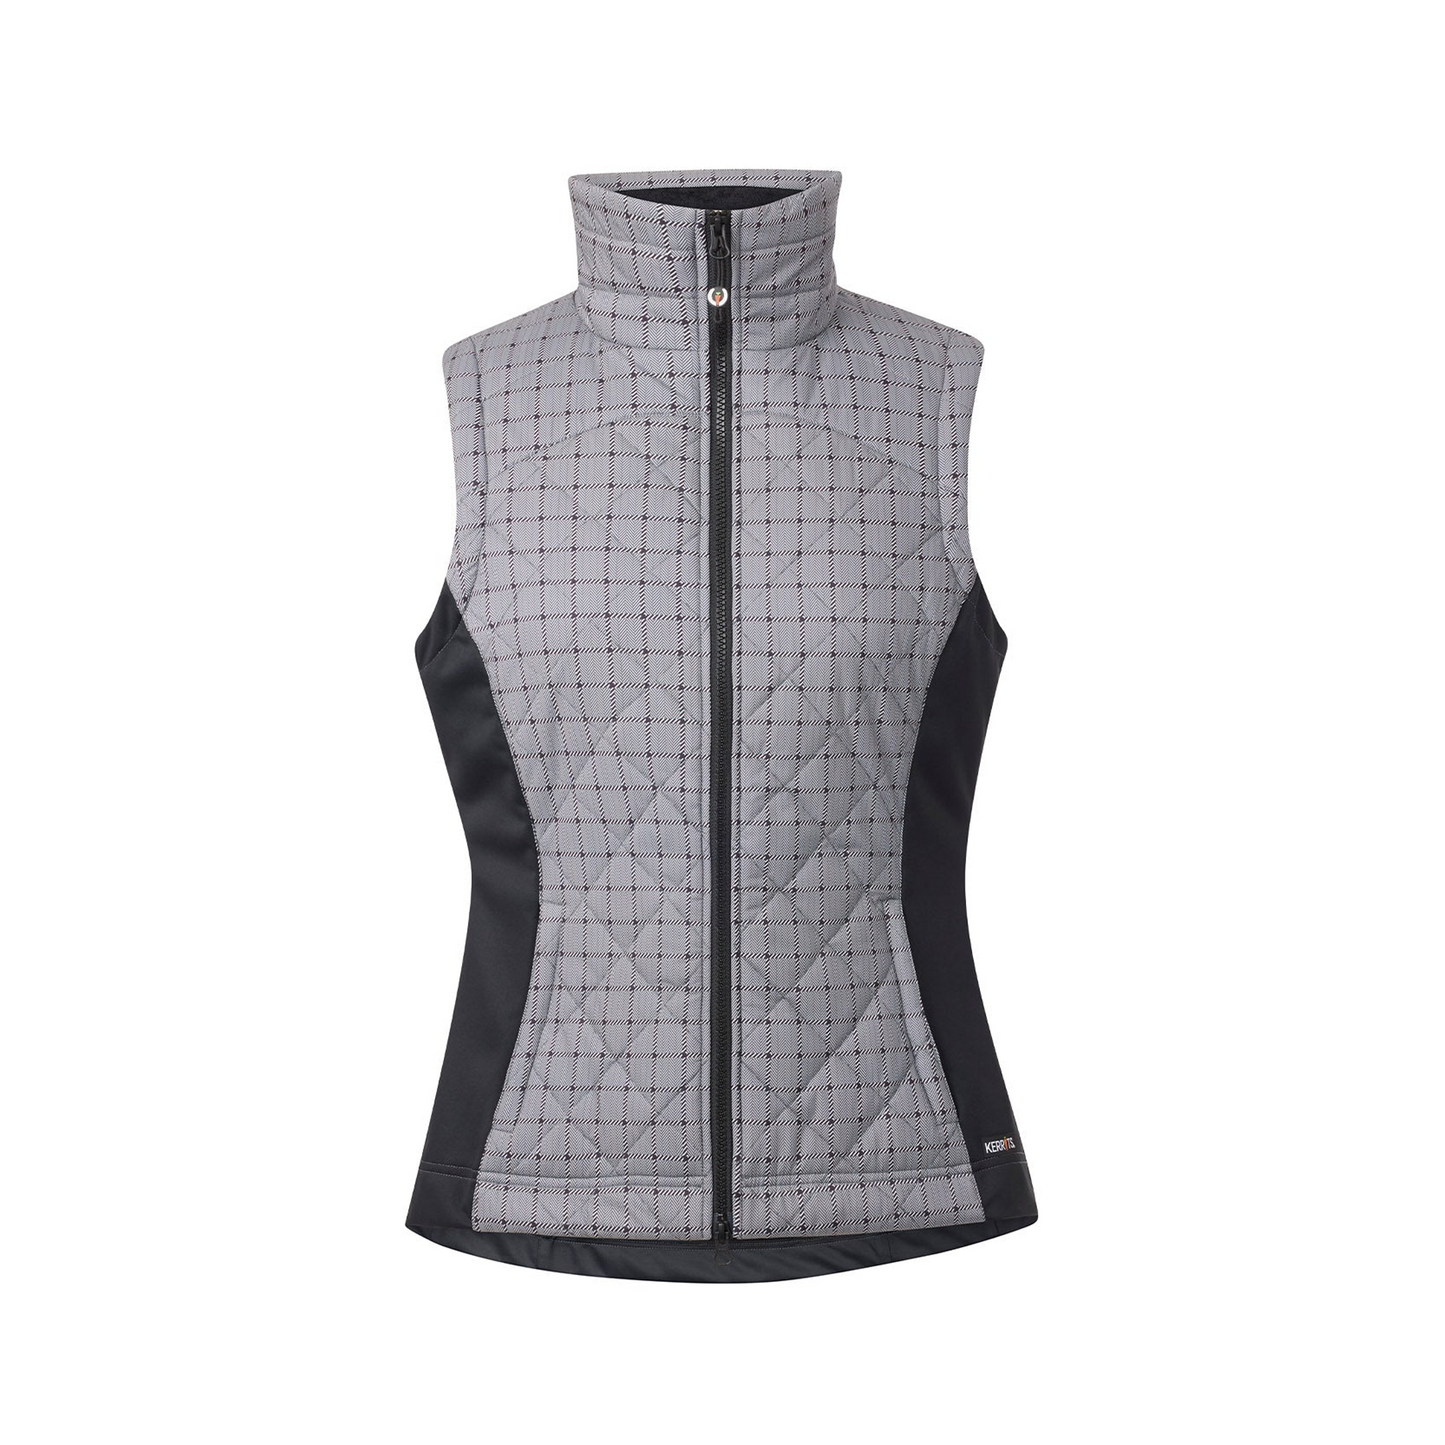 Full Motion Quilted Print Riding Vest